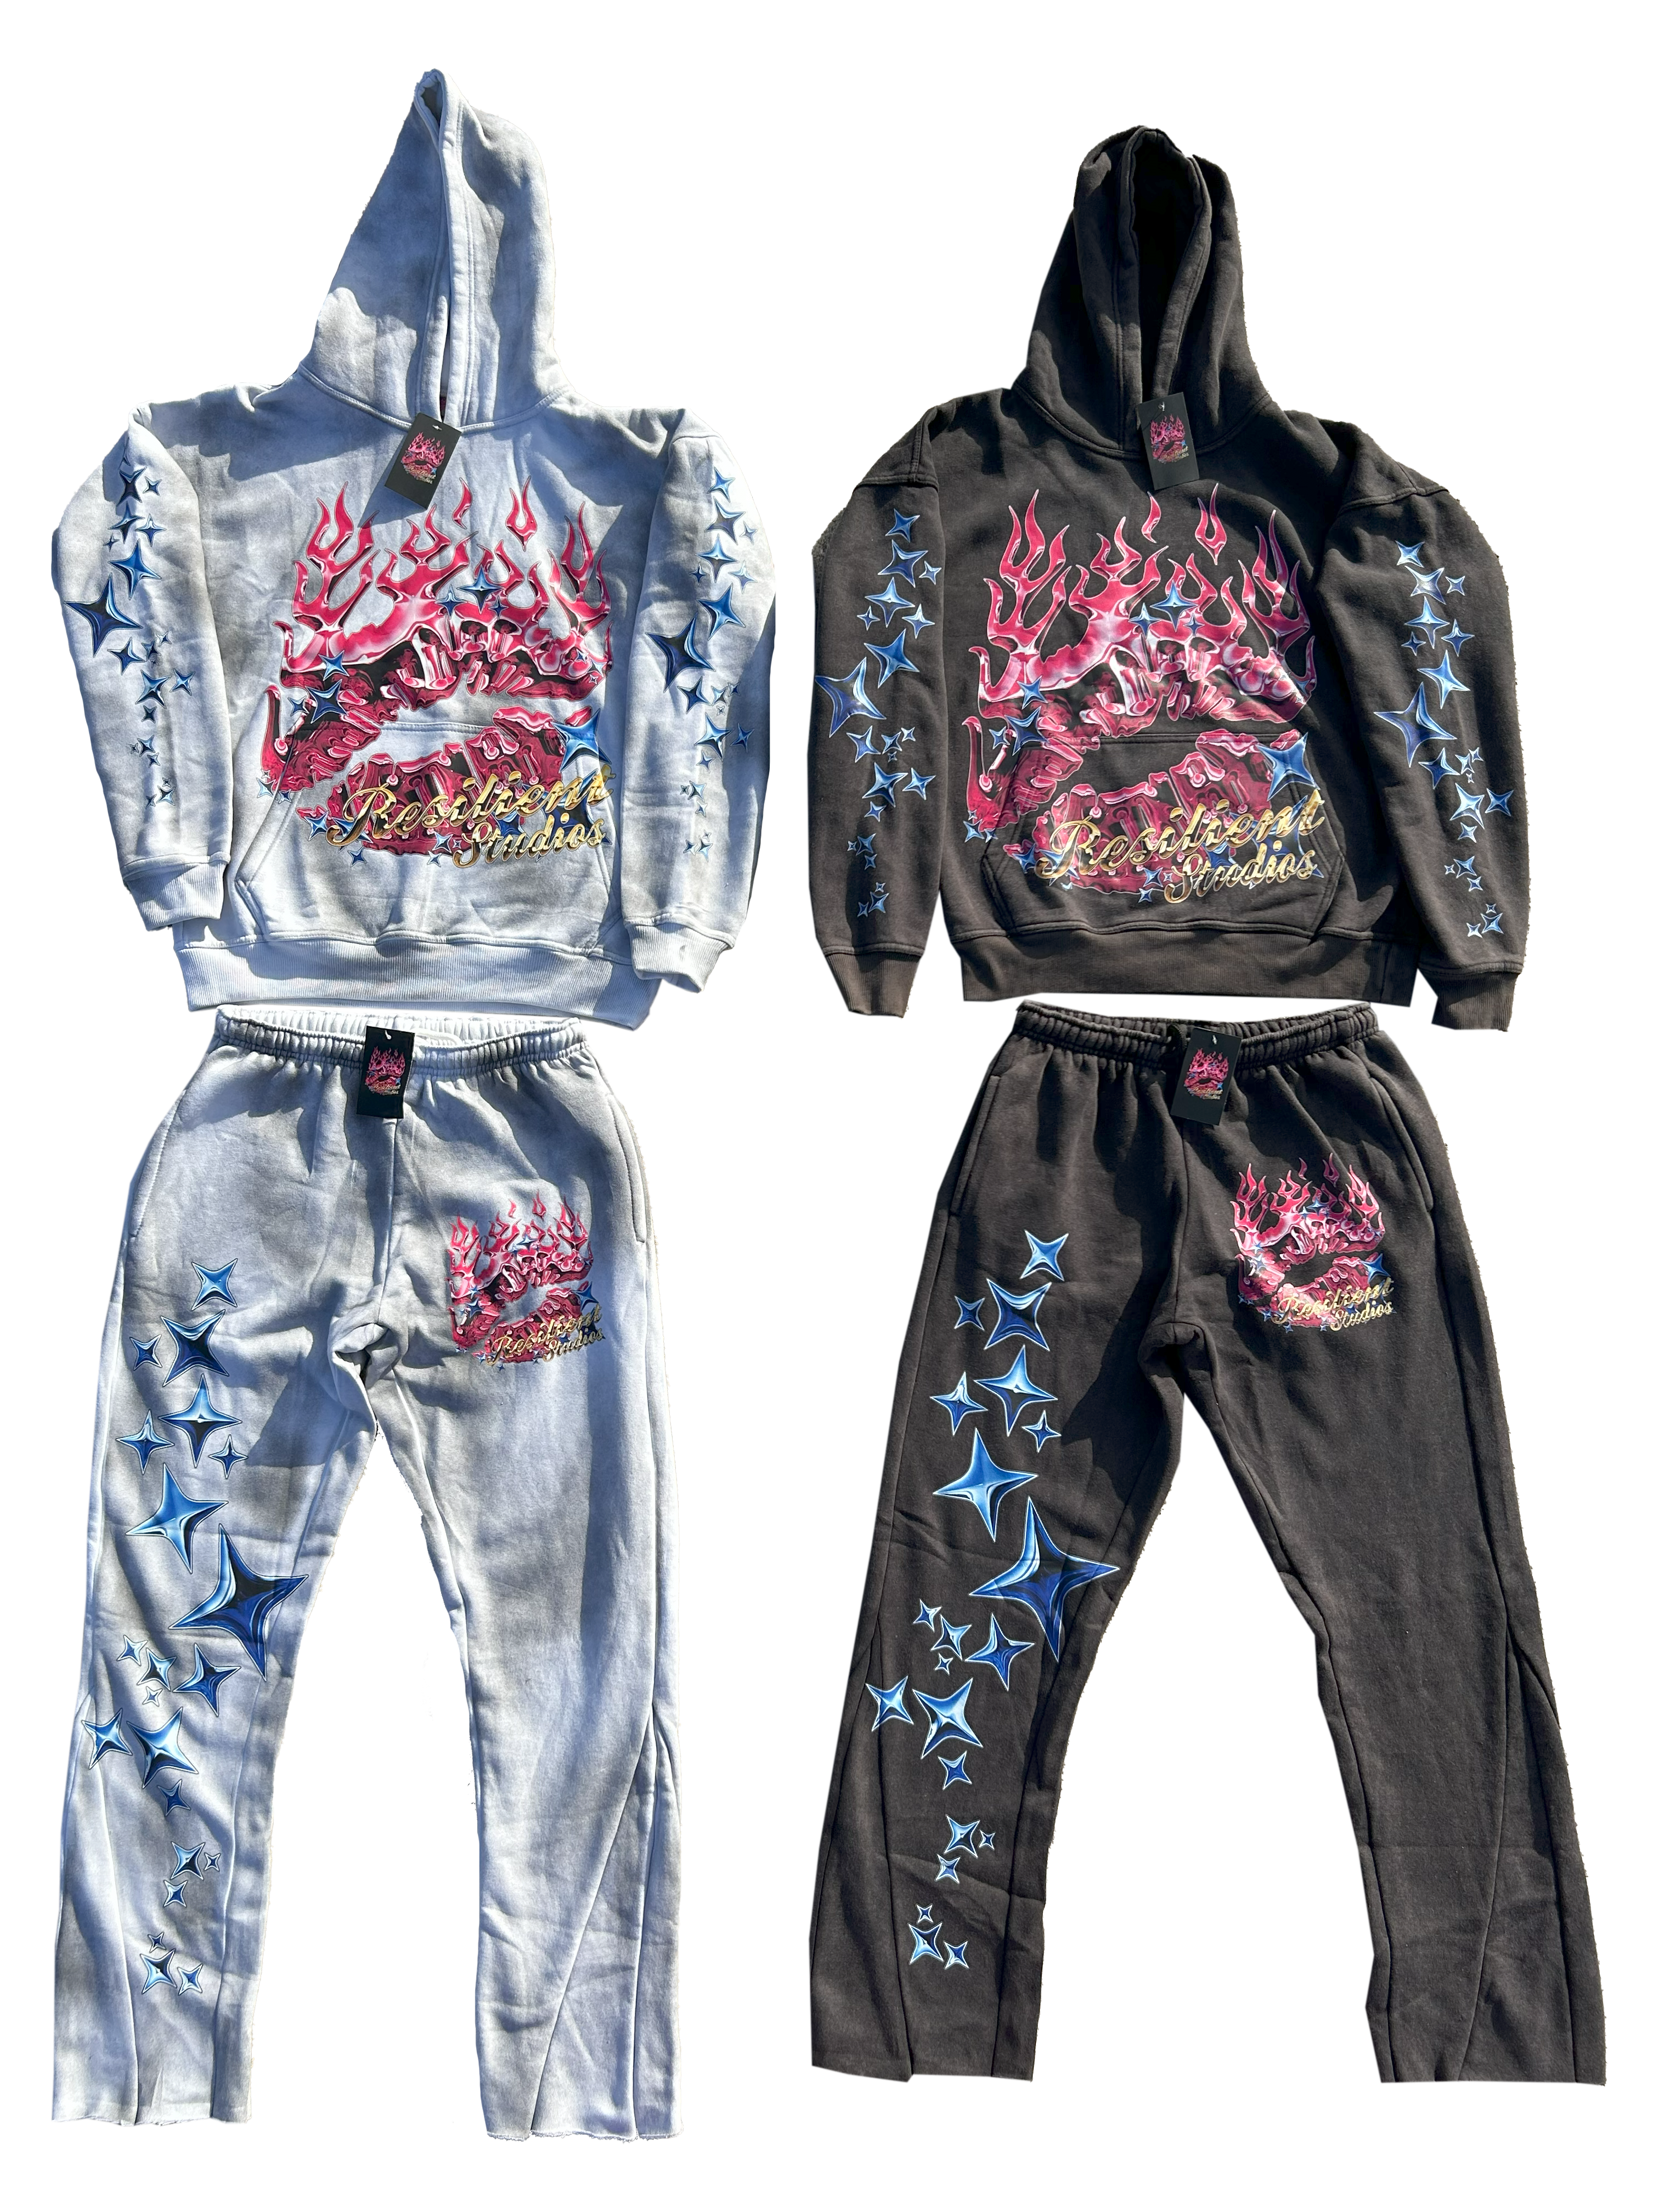 RS LIM. EDITION SWEATSUIT BUNDLE - BLACK AND WHITE